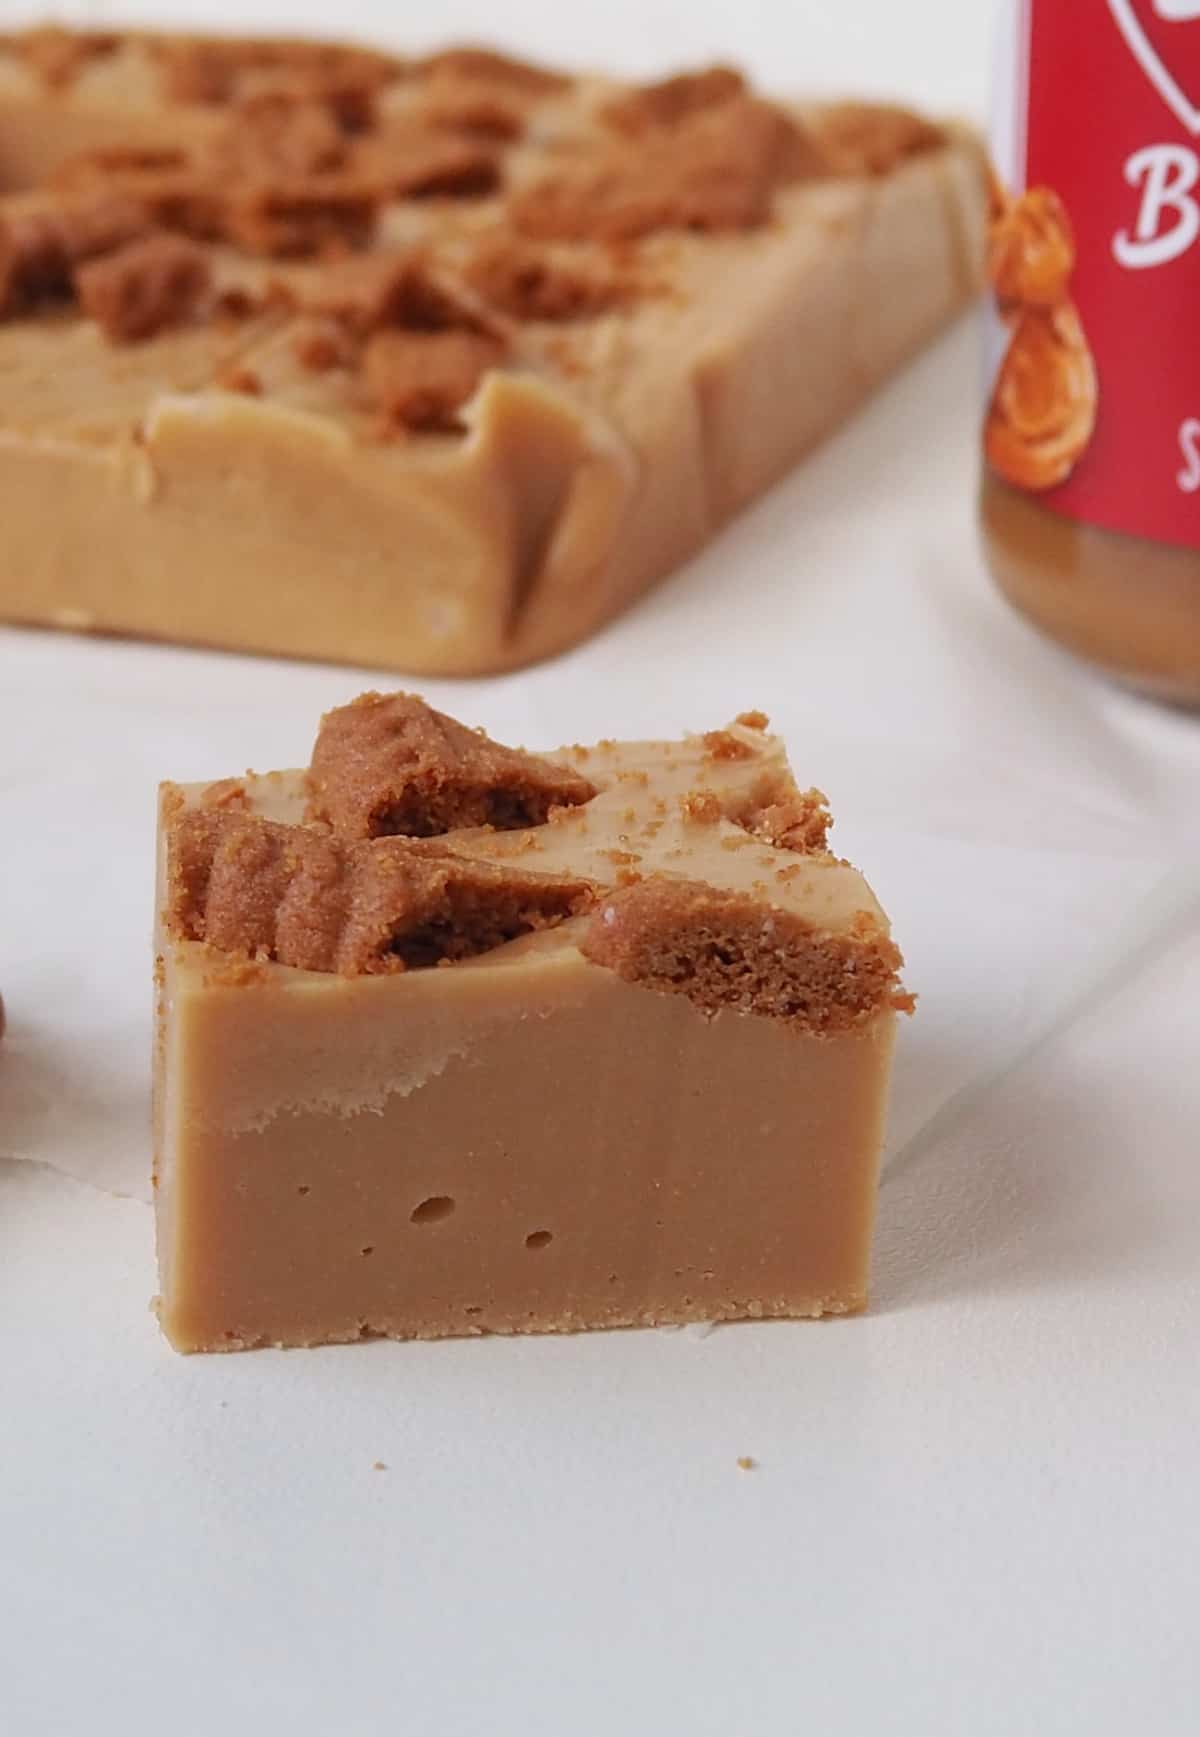 Close up of a piece of Biscoff Fudge on a sheet of baking paper. In the background is more fudge and jar of Biscoff spread.